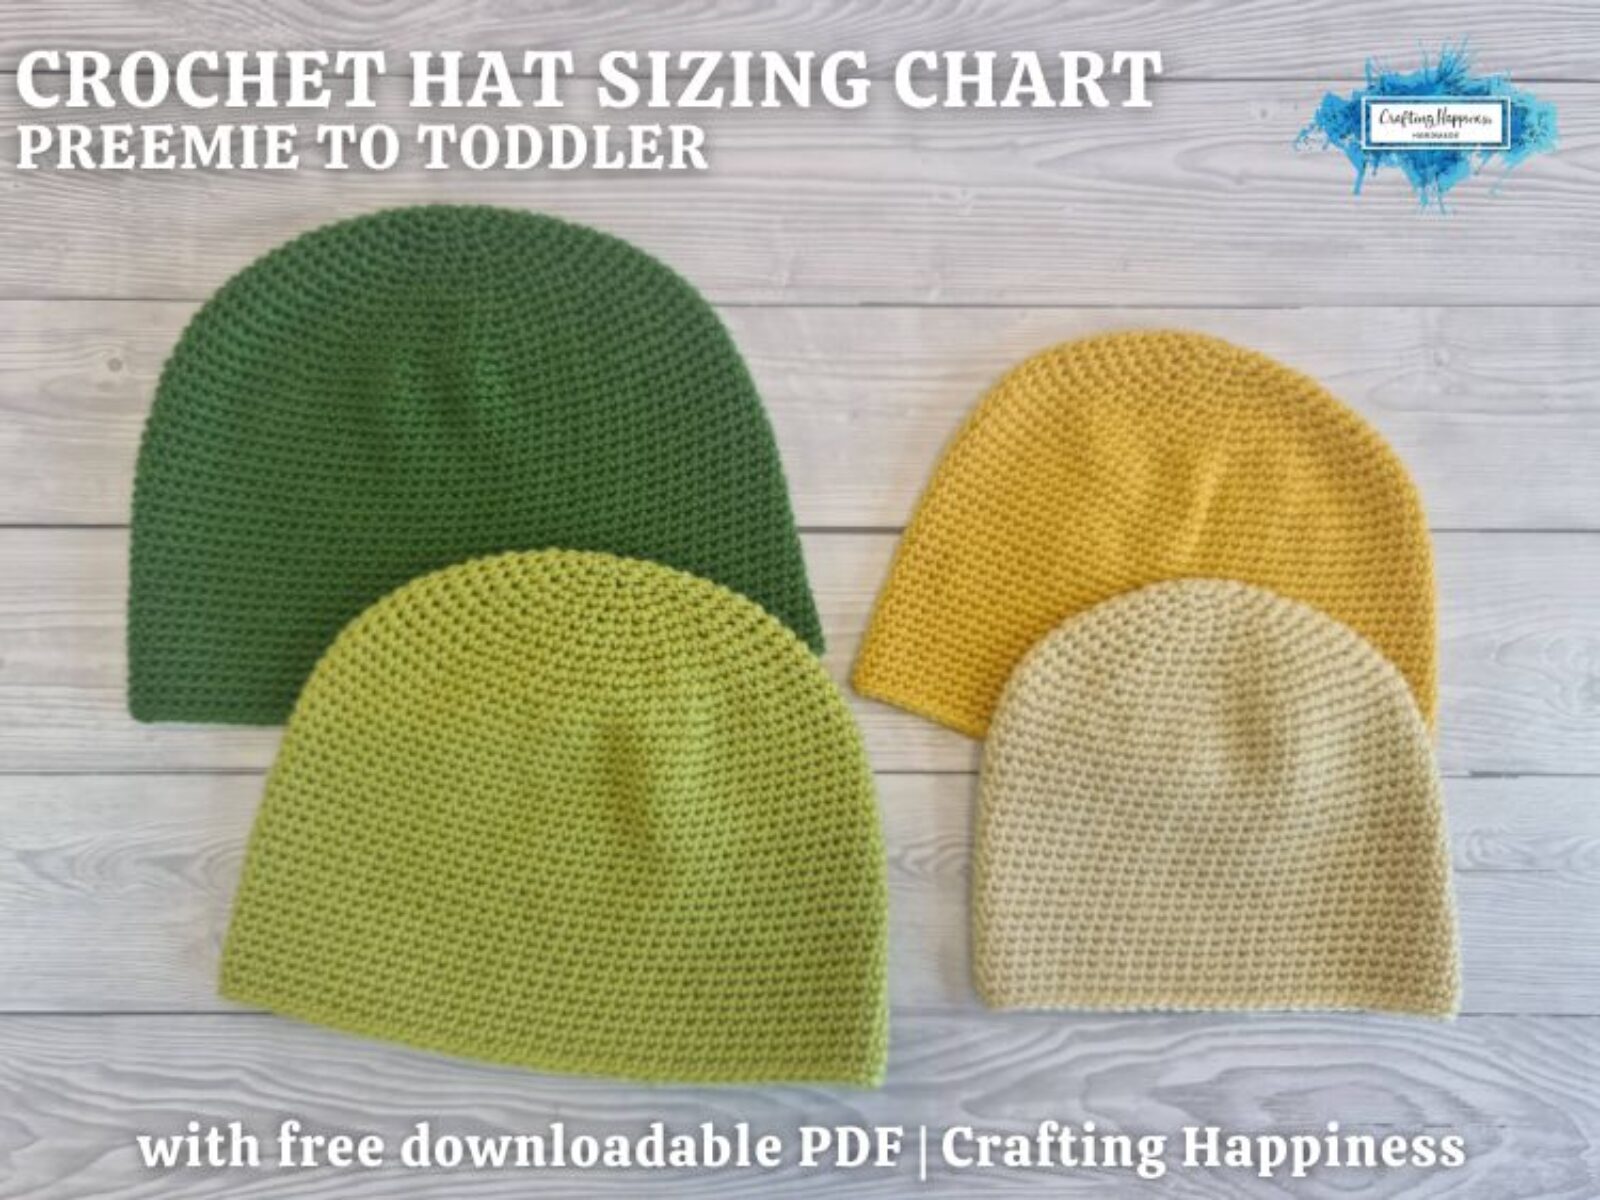 FB POSTER - Crochet Hat Sizing Chart Preemie To Toddler Crafting Happiness